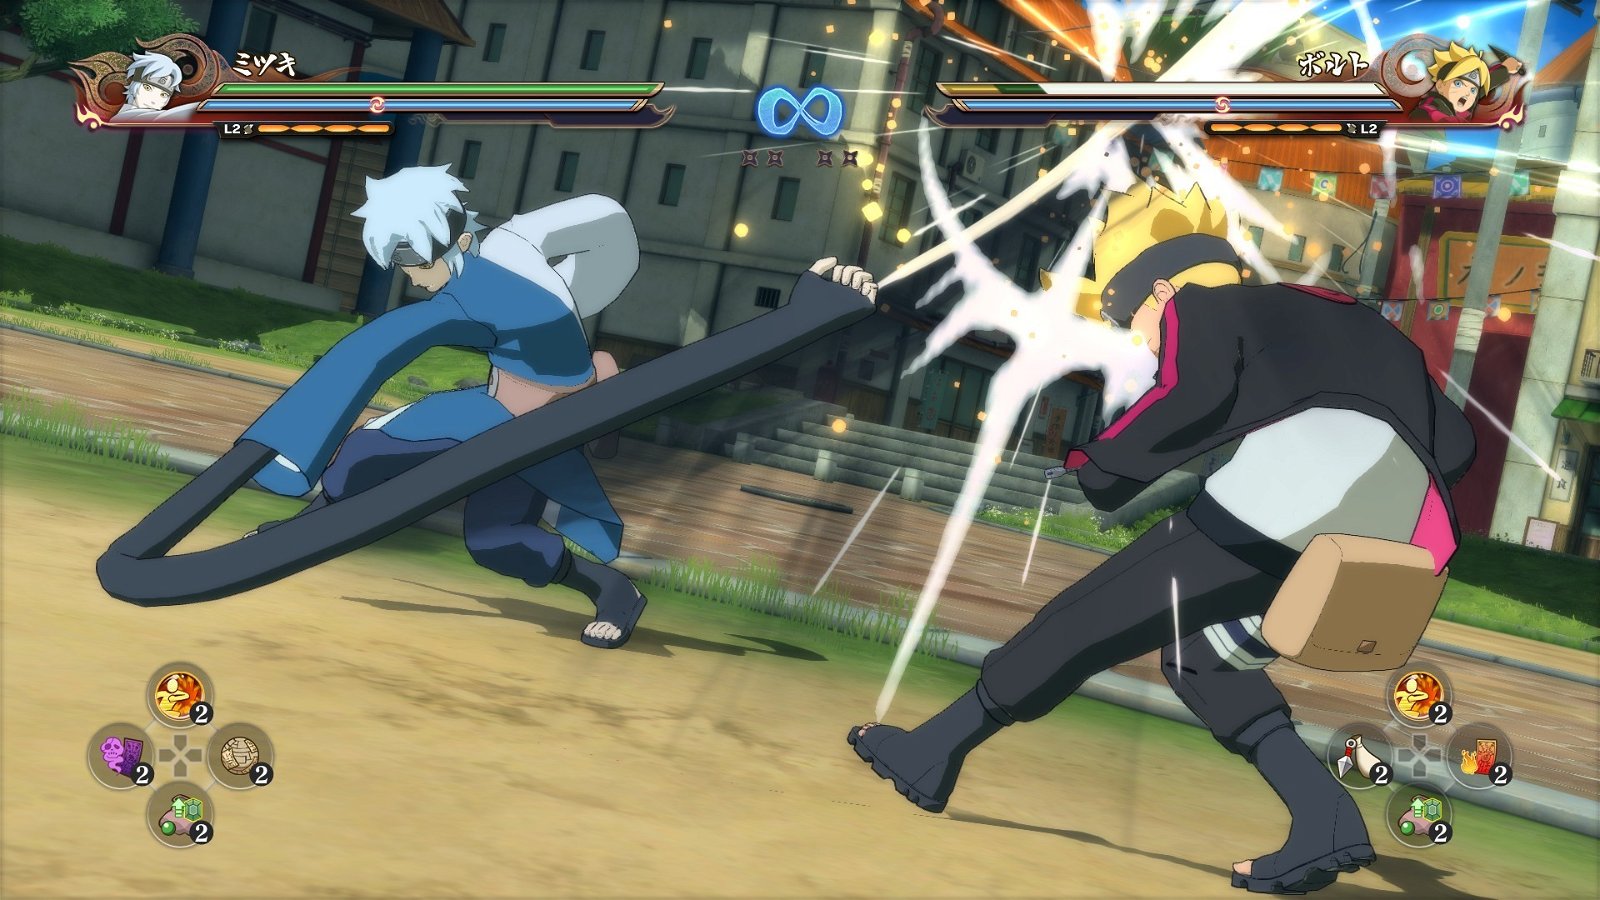 Naruto Shippuden: Ultimate Ninja Storm 4 - Road to Boruto, Naruto Shippuden Ultimate Ninja Storm 4 Road to Boruto, Naruto Shippuden, Nintendo Switch, Switch, release date, gameplay, features, price, pre-order, trailer, US, North America, Europe, Japan, Bandai Namco